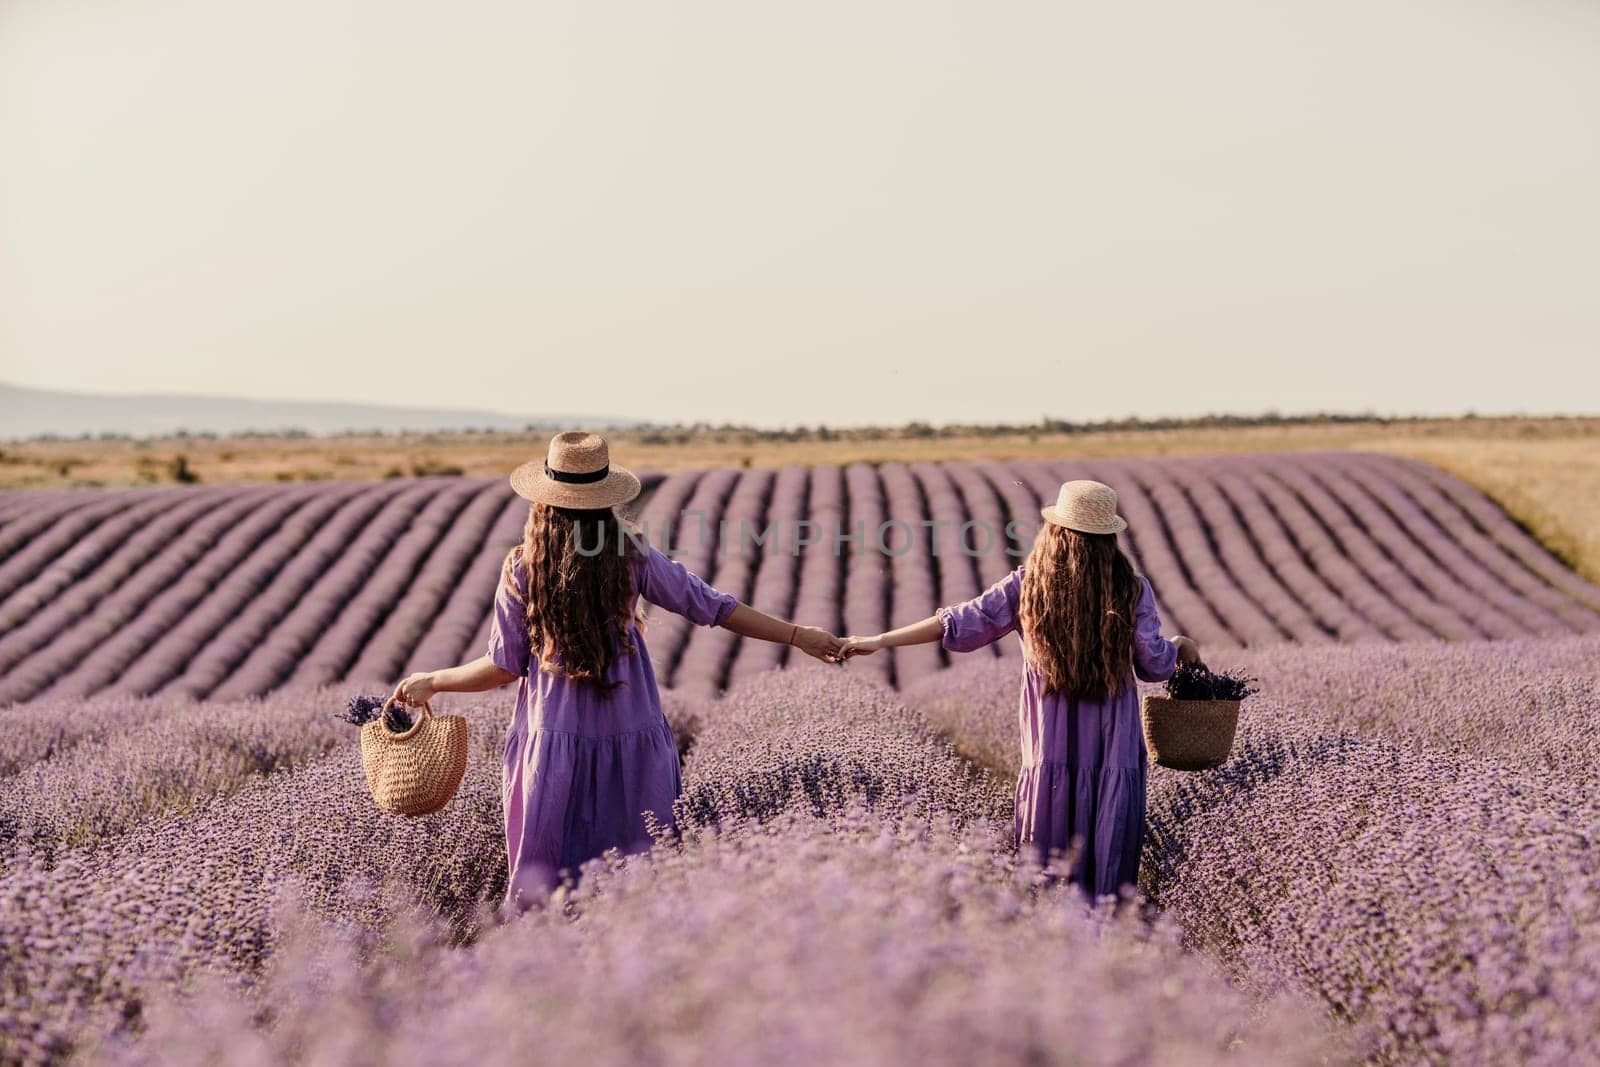 Mom and daughter are running through a lavender field dressed in purple dresses, long hair flowing and wearing hats. The field is full of purple flowers and the sky is clear. by Matiunina